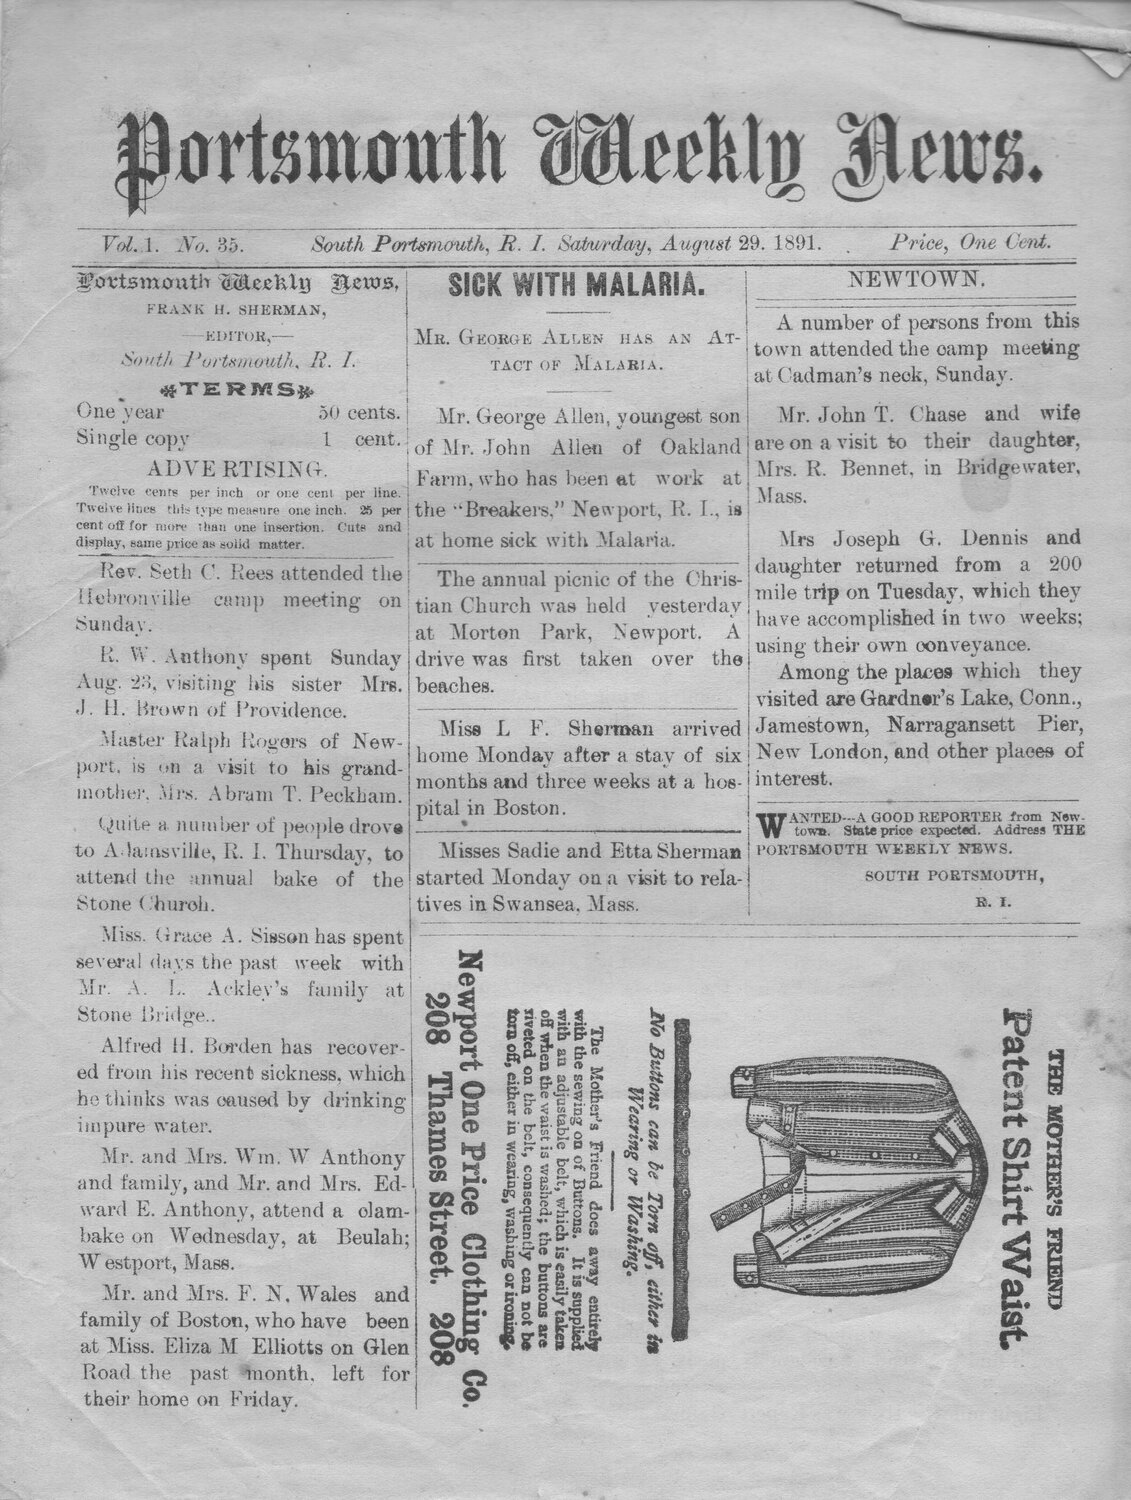 The front page of the Aug. 29, 1891 edition of The Portsmouth Weekly News, complete with an advertisement that ran sideways.